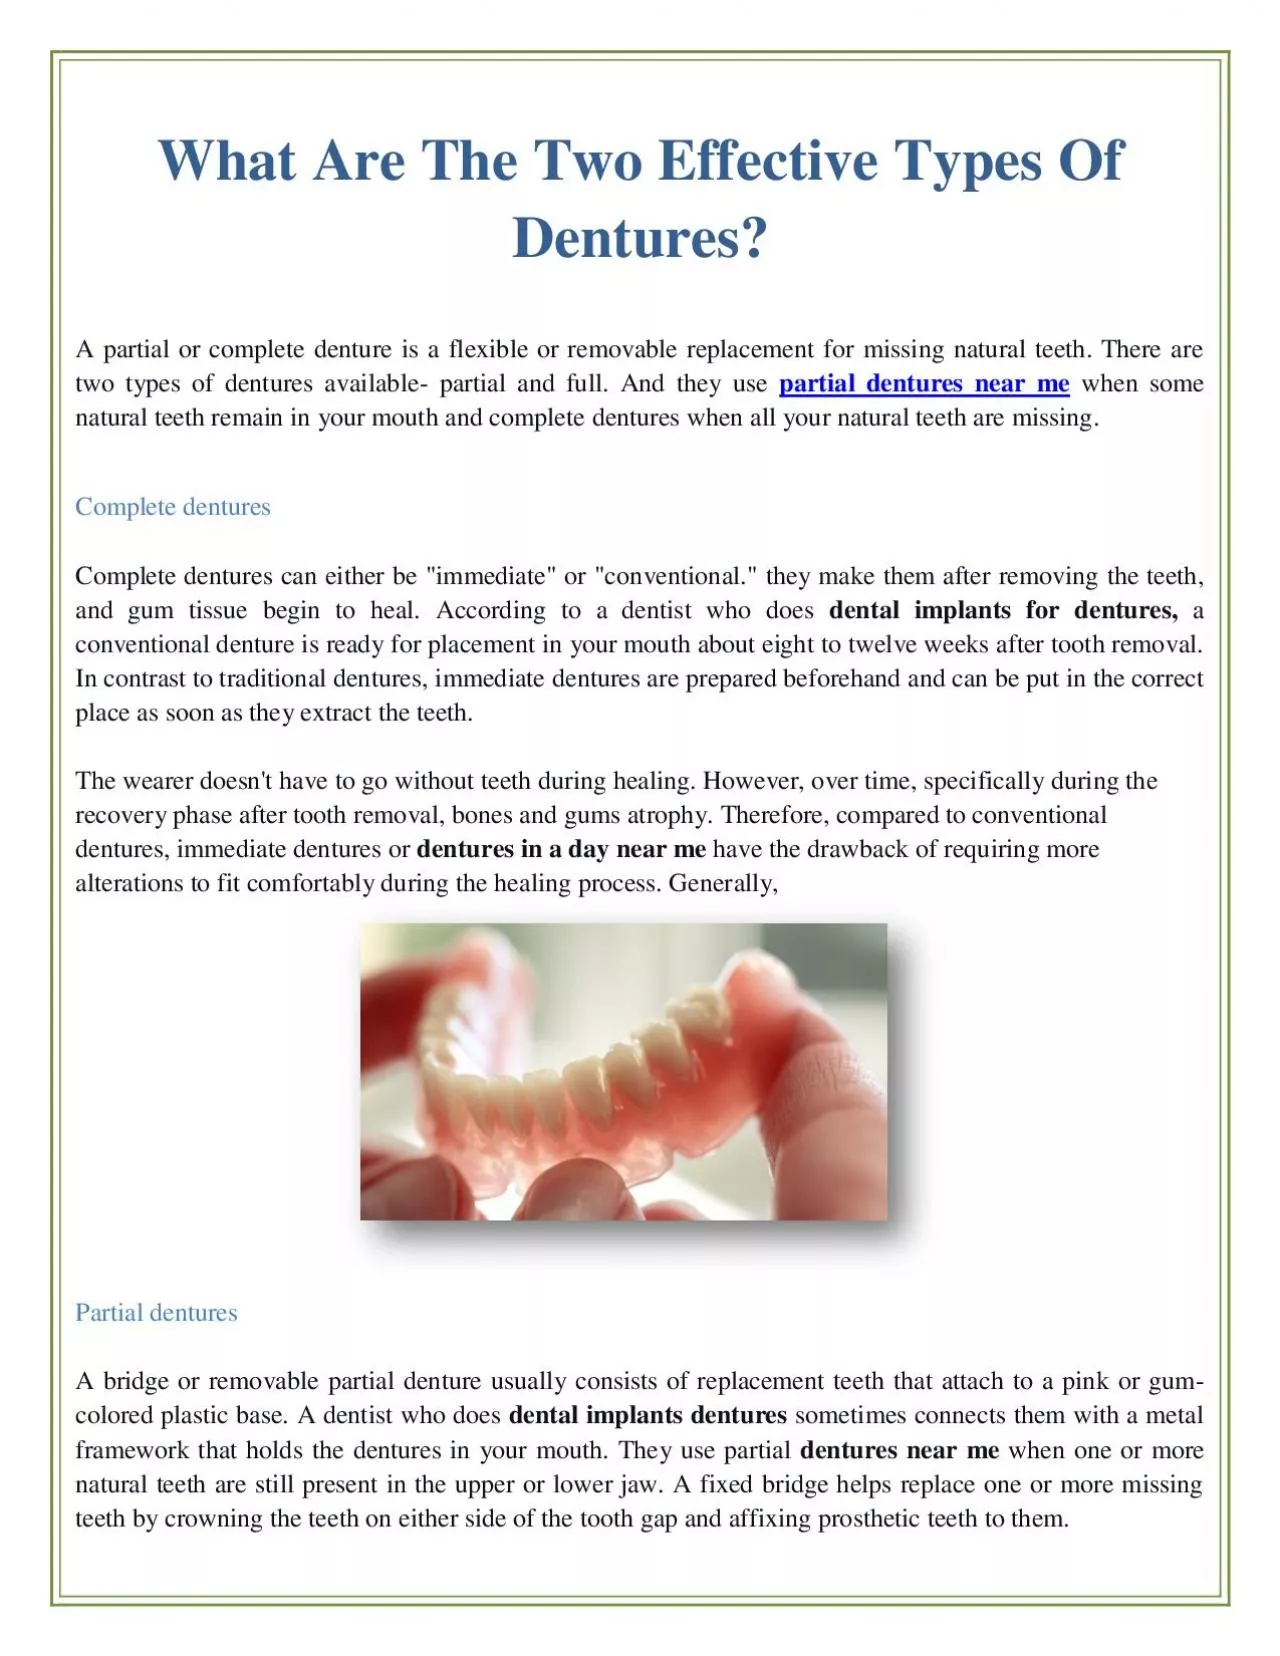 What Are The Two Effective Types Of Dentures?